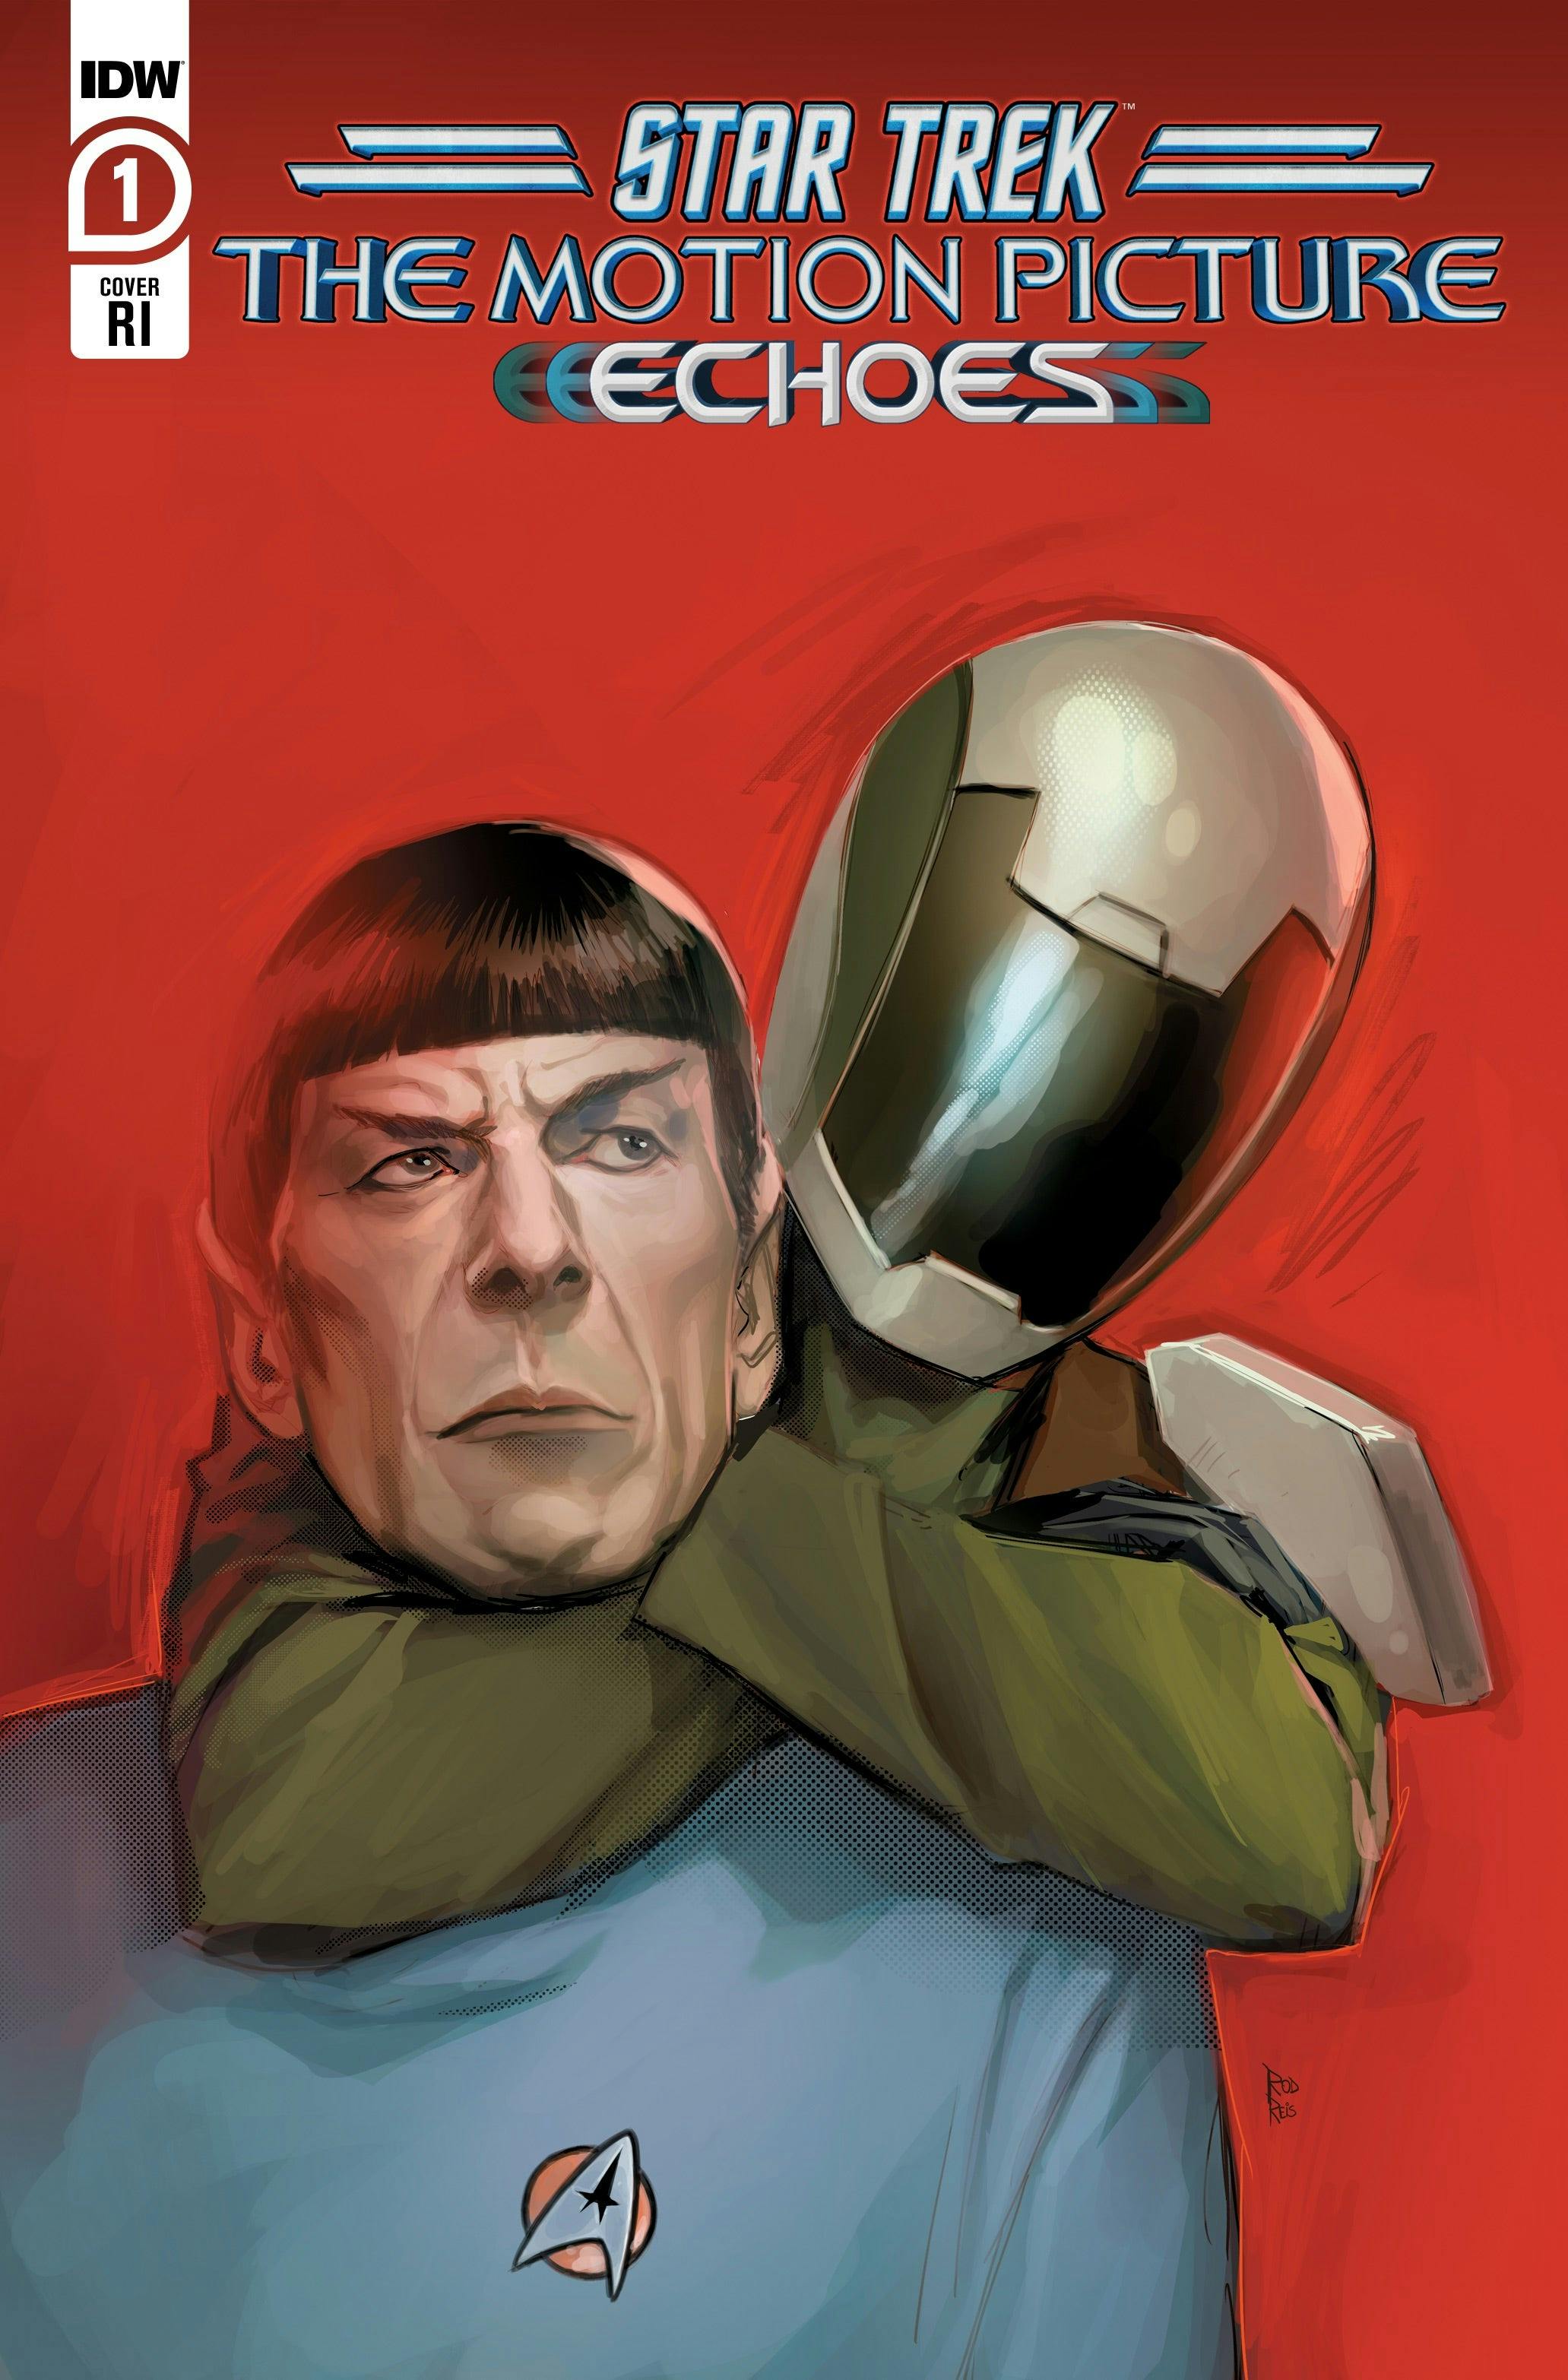 Star Trek: The Motion Picture — Echoes #1 Retailer Incentive Variant by Rod Reis